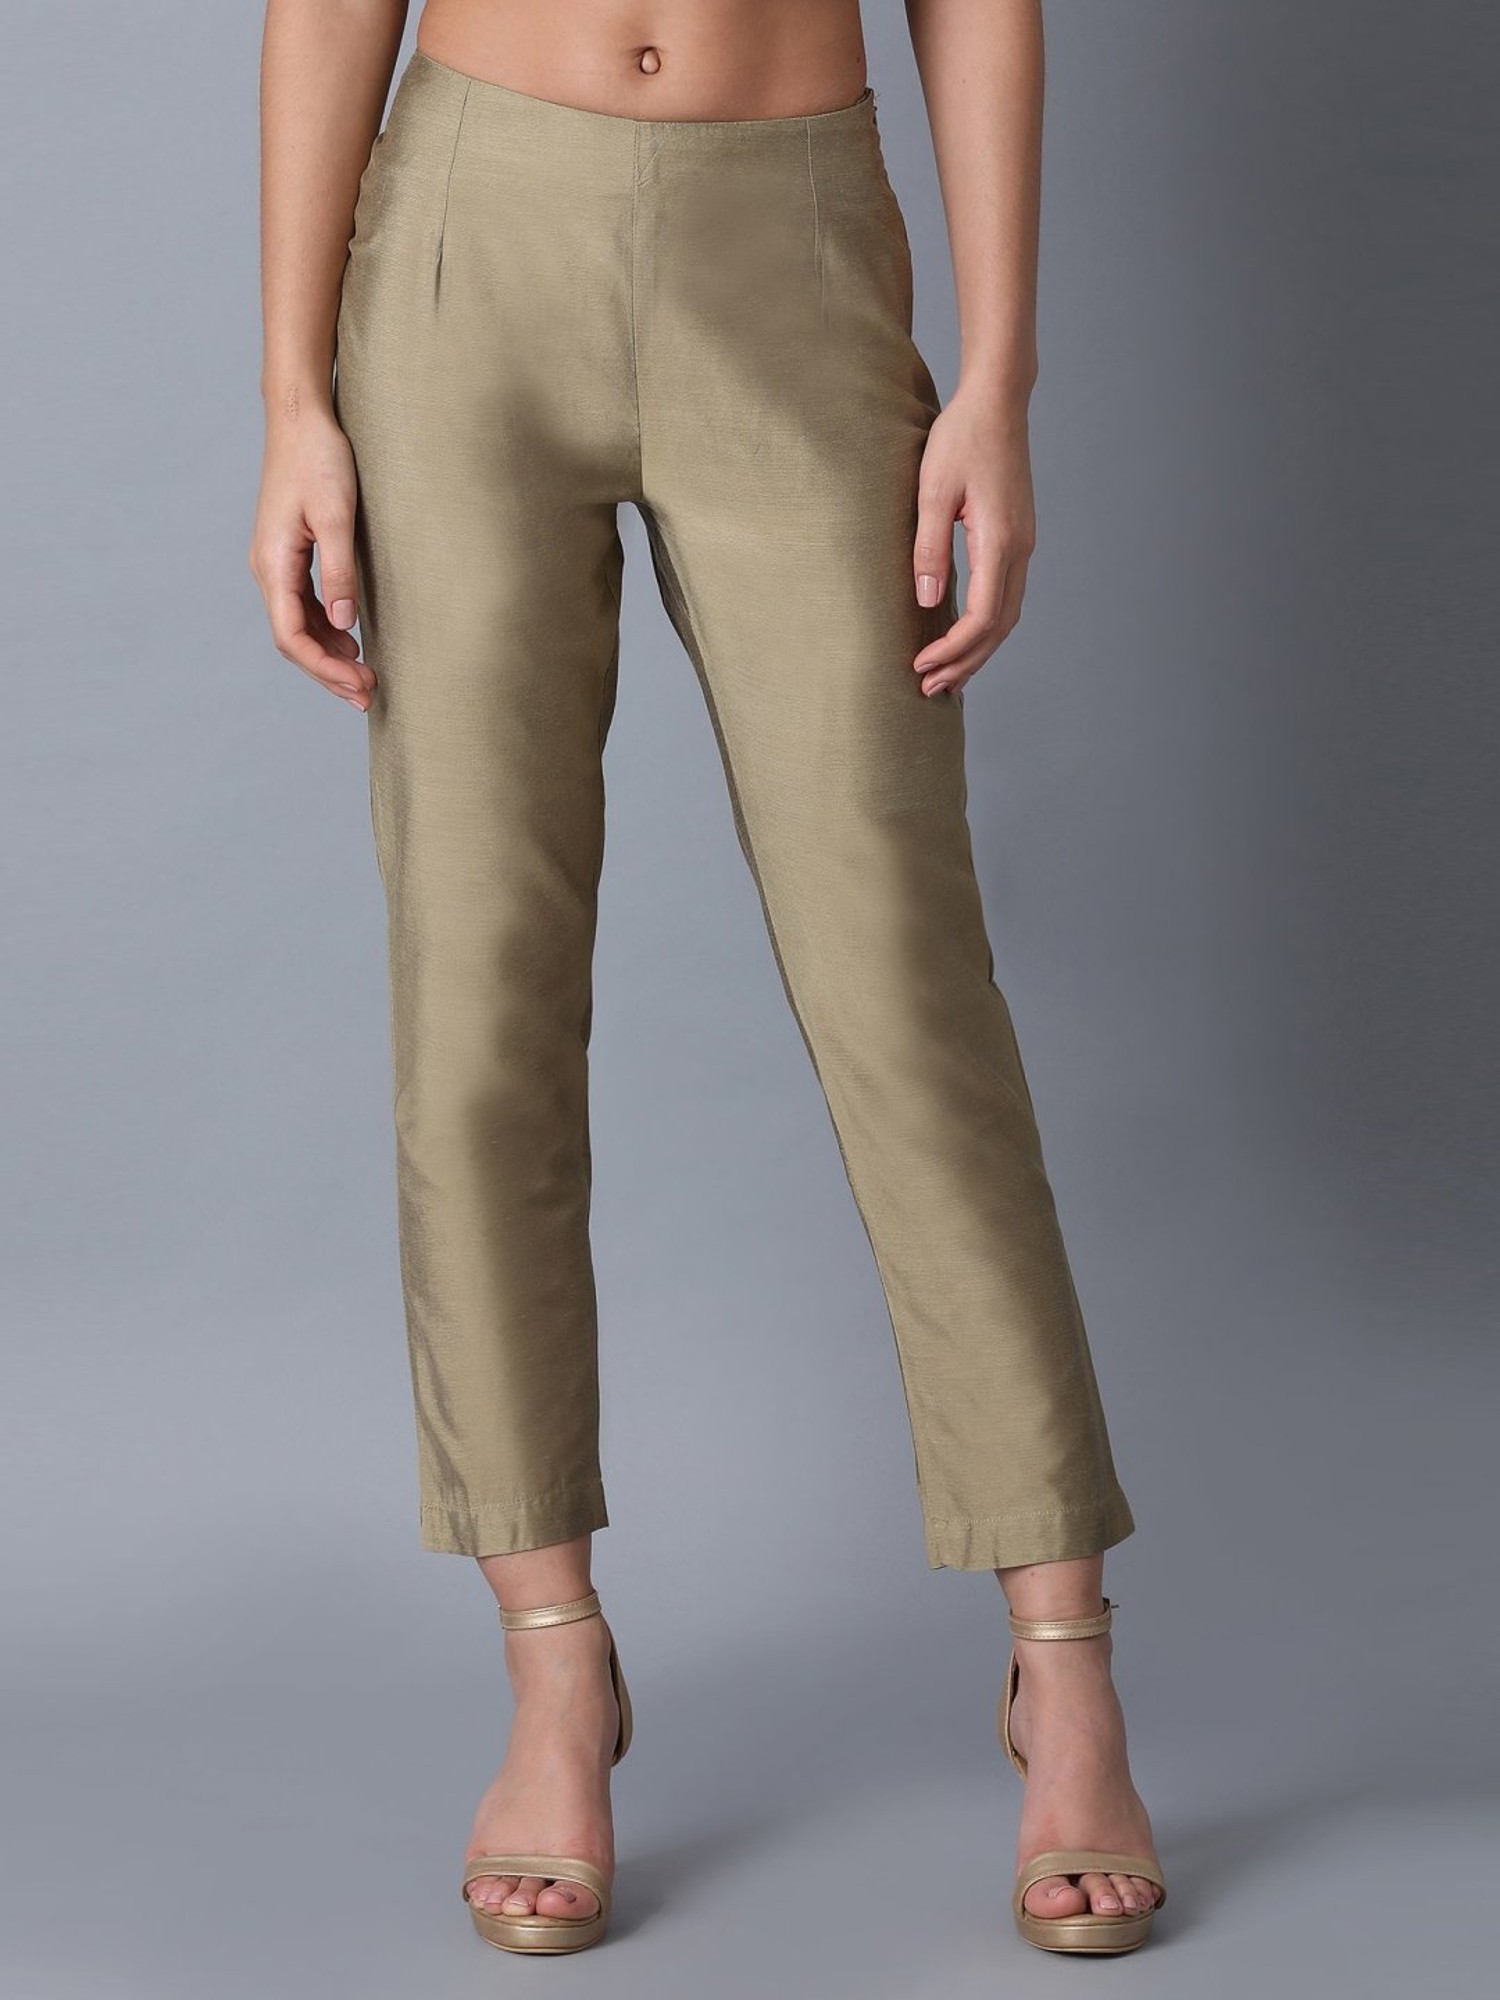 Buy Raw Silk Pants, Pants Silk, Silk Pants, Silk Pants for Women Raw Silk  Trousers, Black Trouser, Yellow Trouser, Slim Pants Online in India - Etsy  | Silk pants, Pants for women,